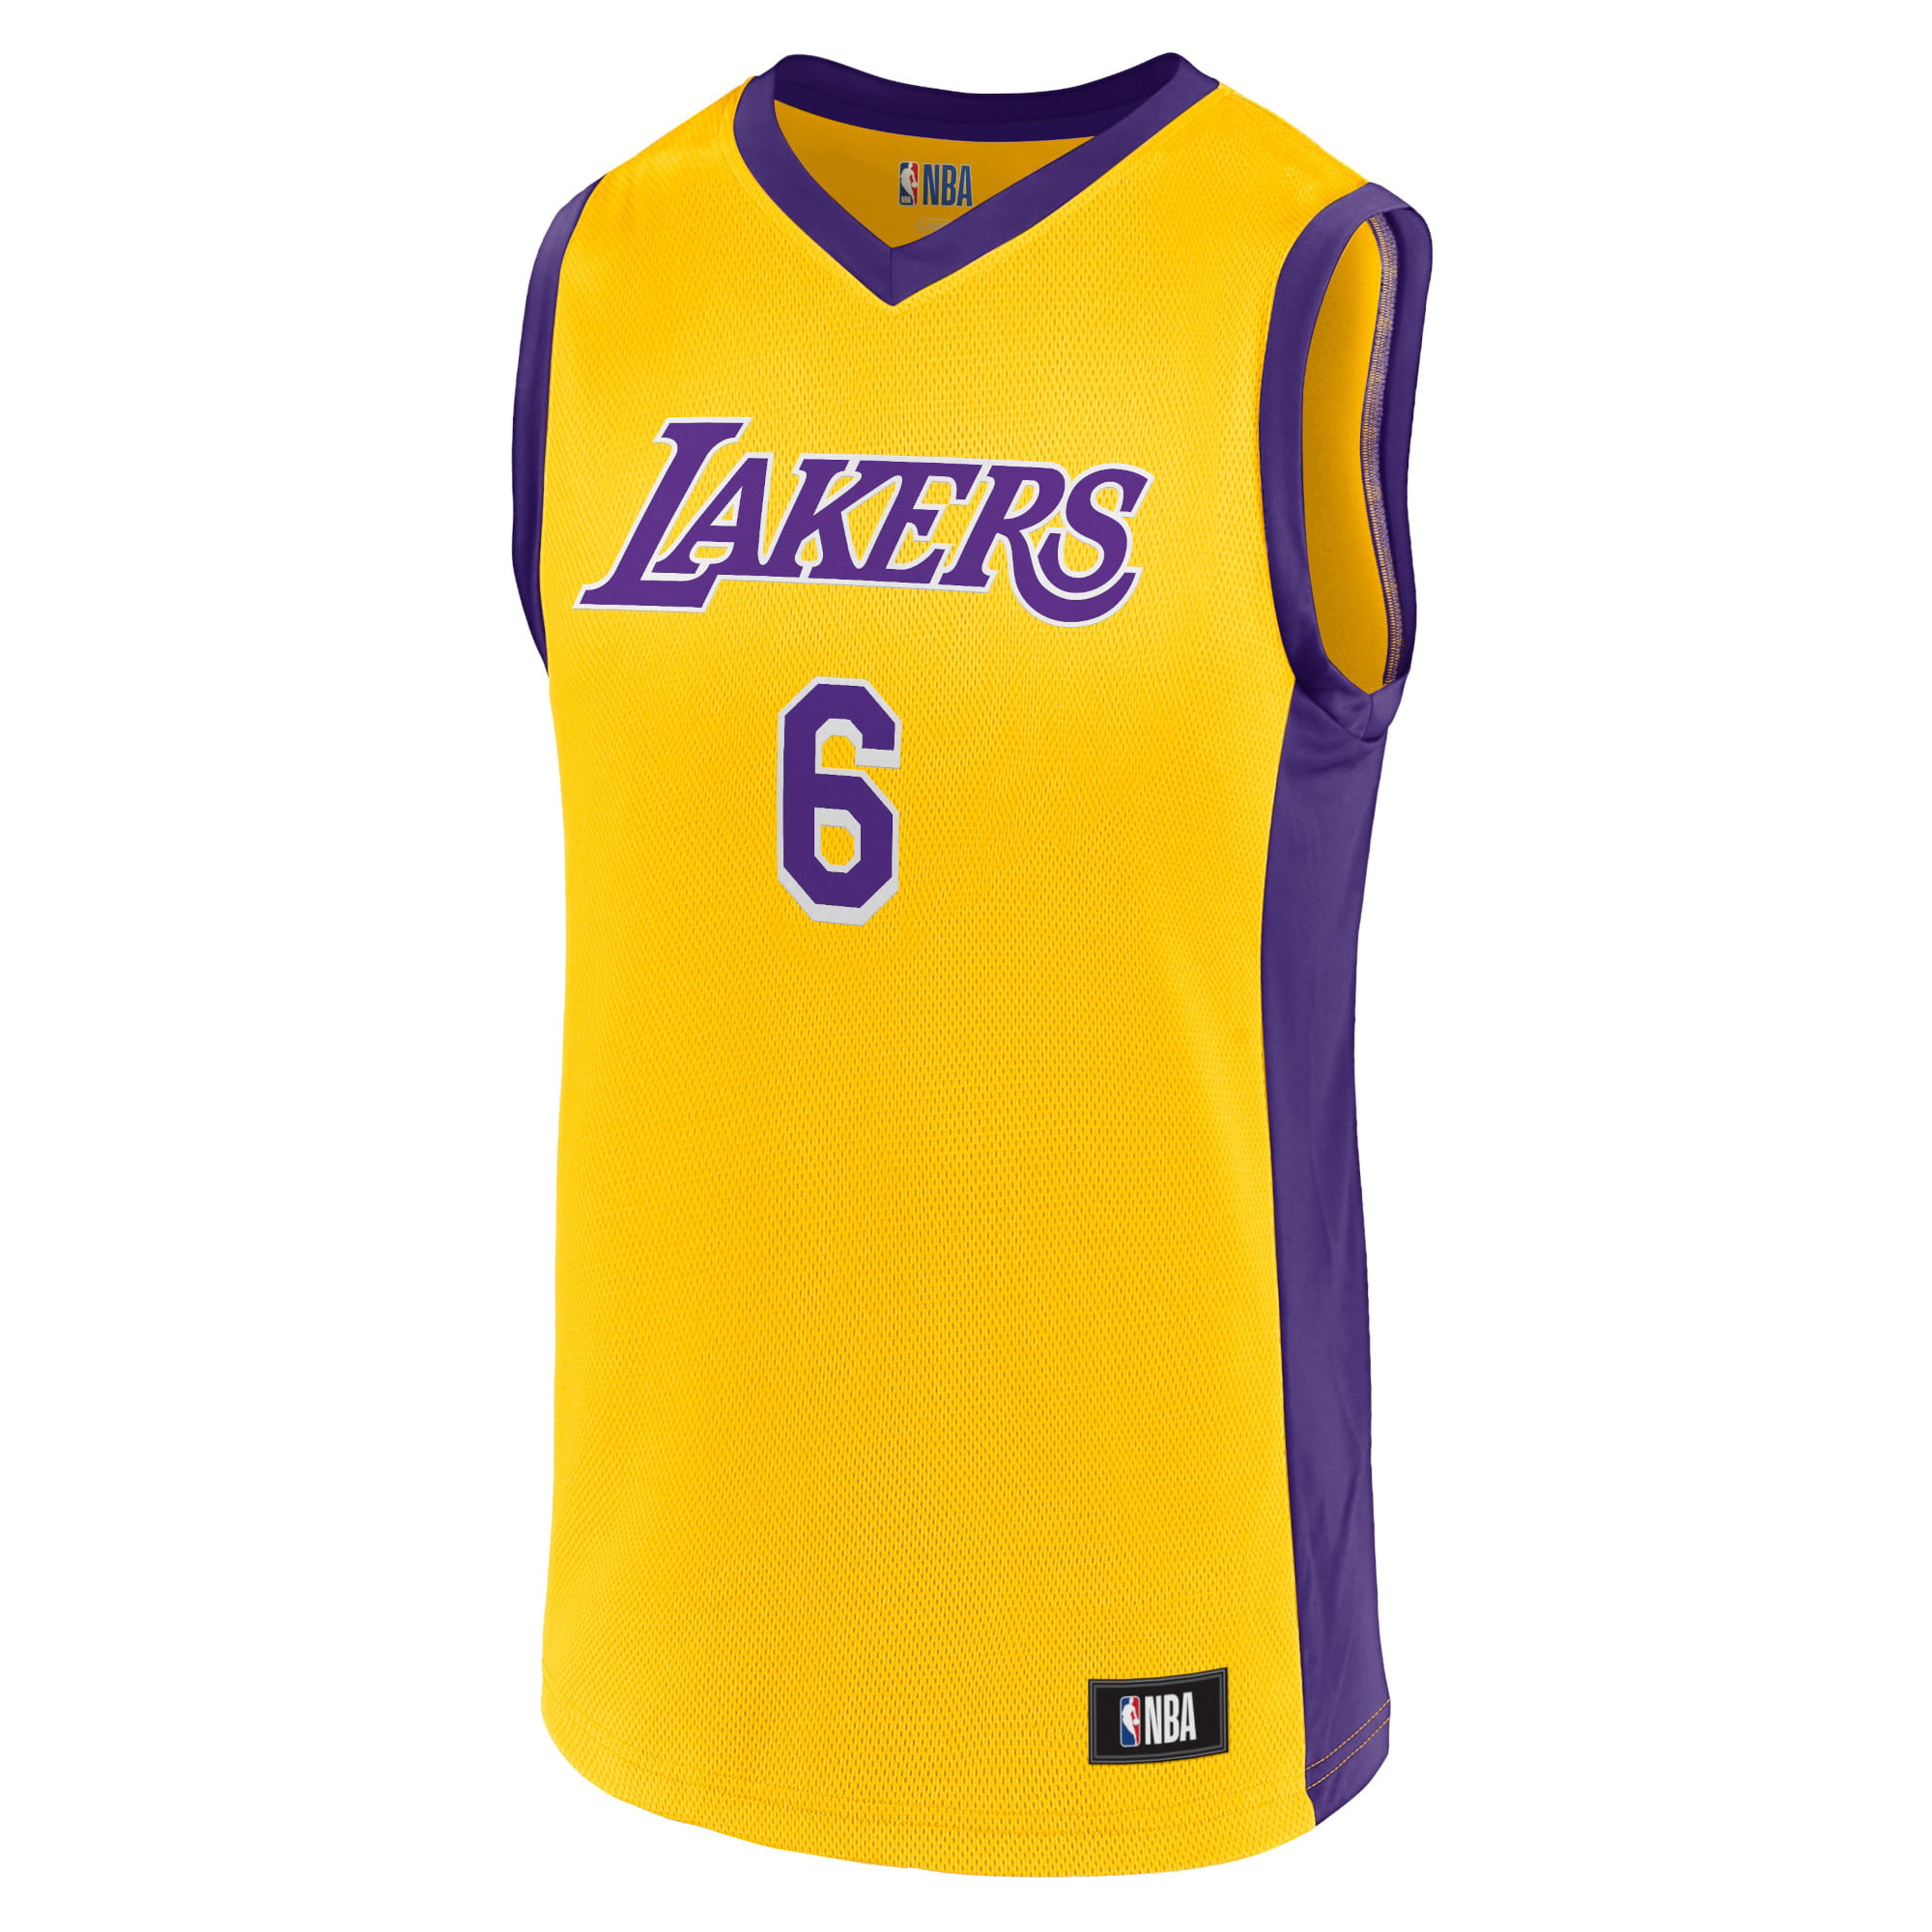 Lakers point guard jersey